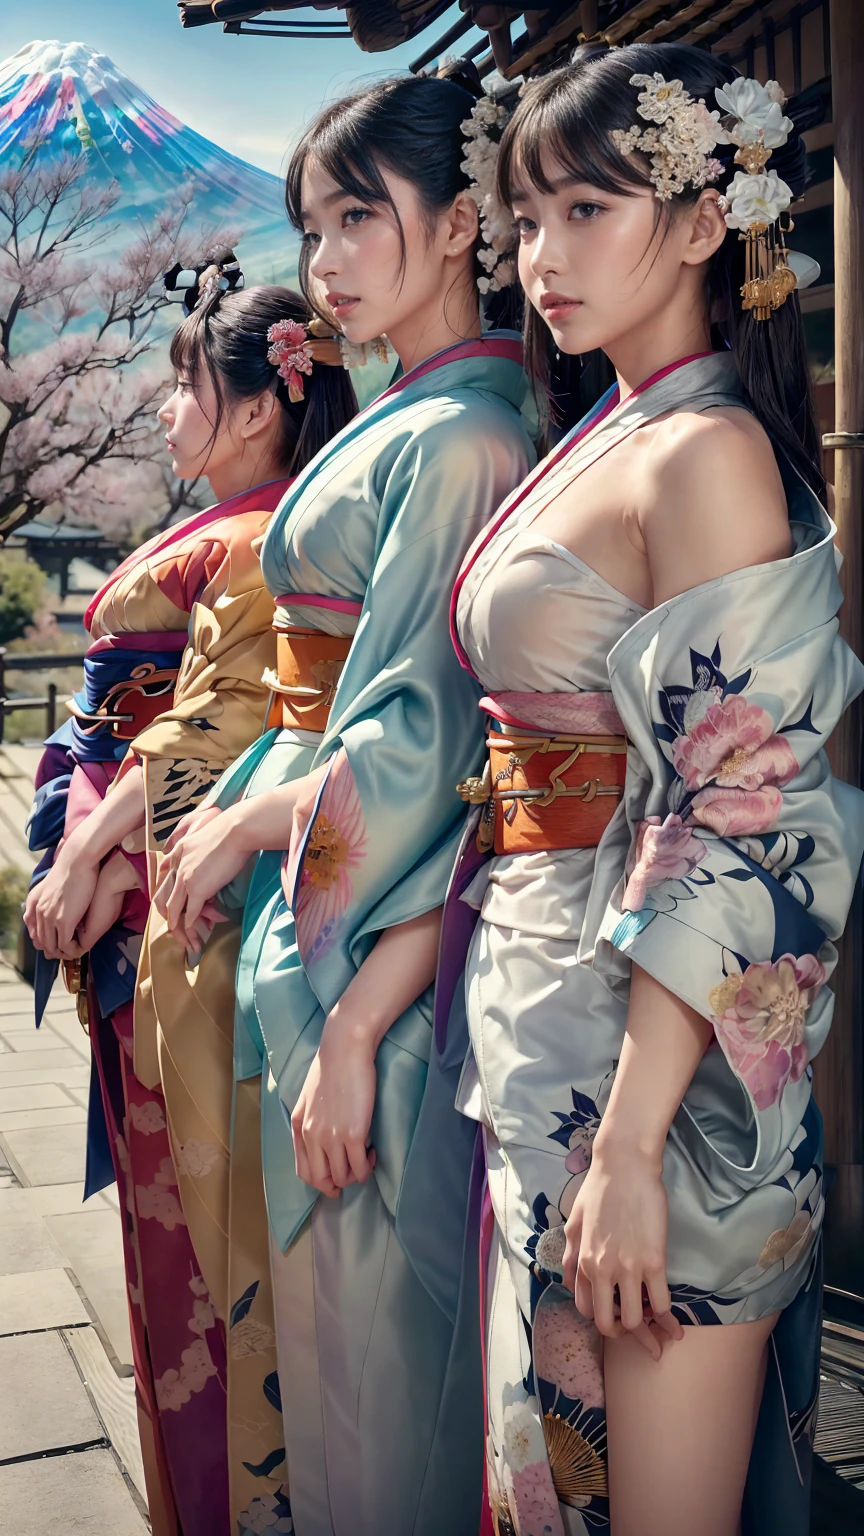 Highest quality, masterpiece, High resolution, 8K, (Realistically：1.4), 超High resolution, One girl, Super detailed, Ultra-realistic, Highly detailed CG illustrations, Official Art, Cinematic light, Realistic, Young and beautiful girl, Full POV, best quality, masterpiece, New Year, 

(Kimono with strikingly beautiful colors:1.7), 

Three Japanese high-school cute girls, looking straight, 

gently smiling, white short scarf, white feather shawl, 

(separately side by side:1.4), 

(The image shows only the upper body:1.7),

 shrine background, (mount Fuji:1.3),winter(season),(outdoors:1.5)